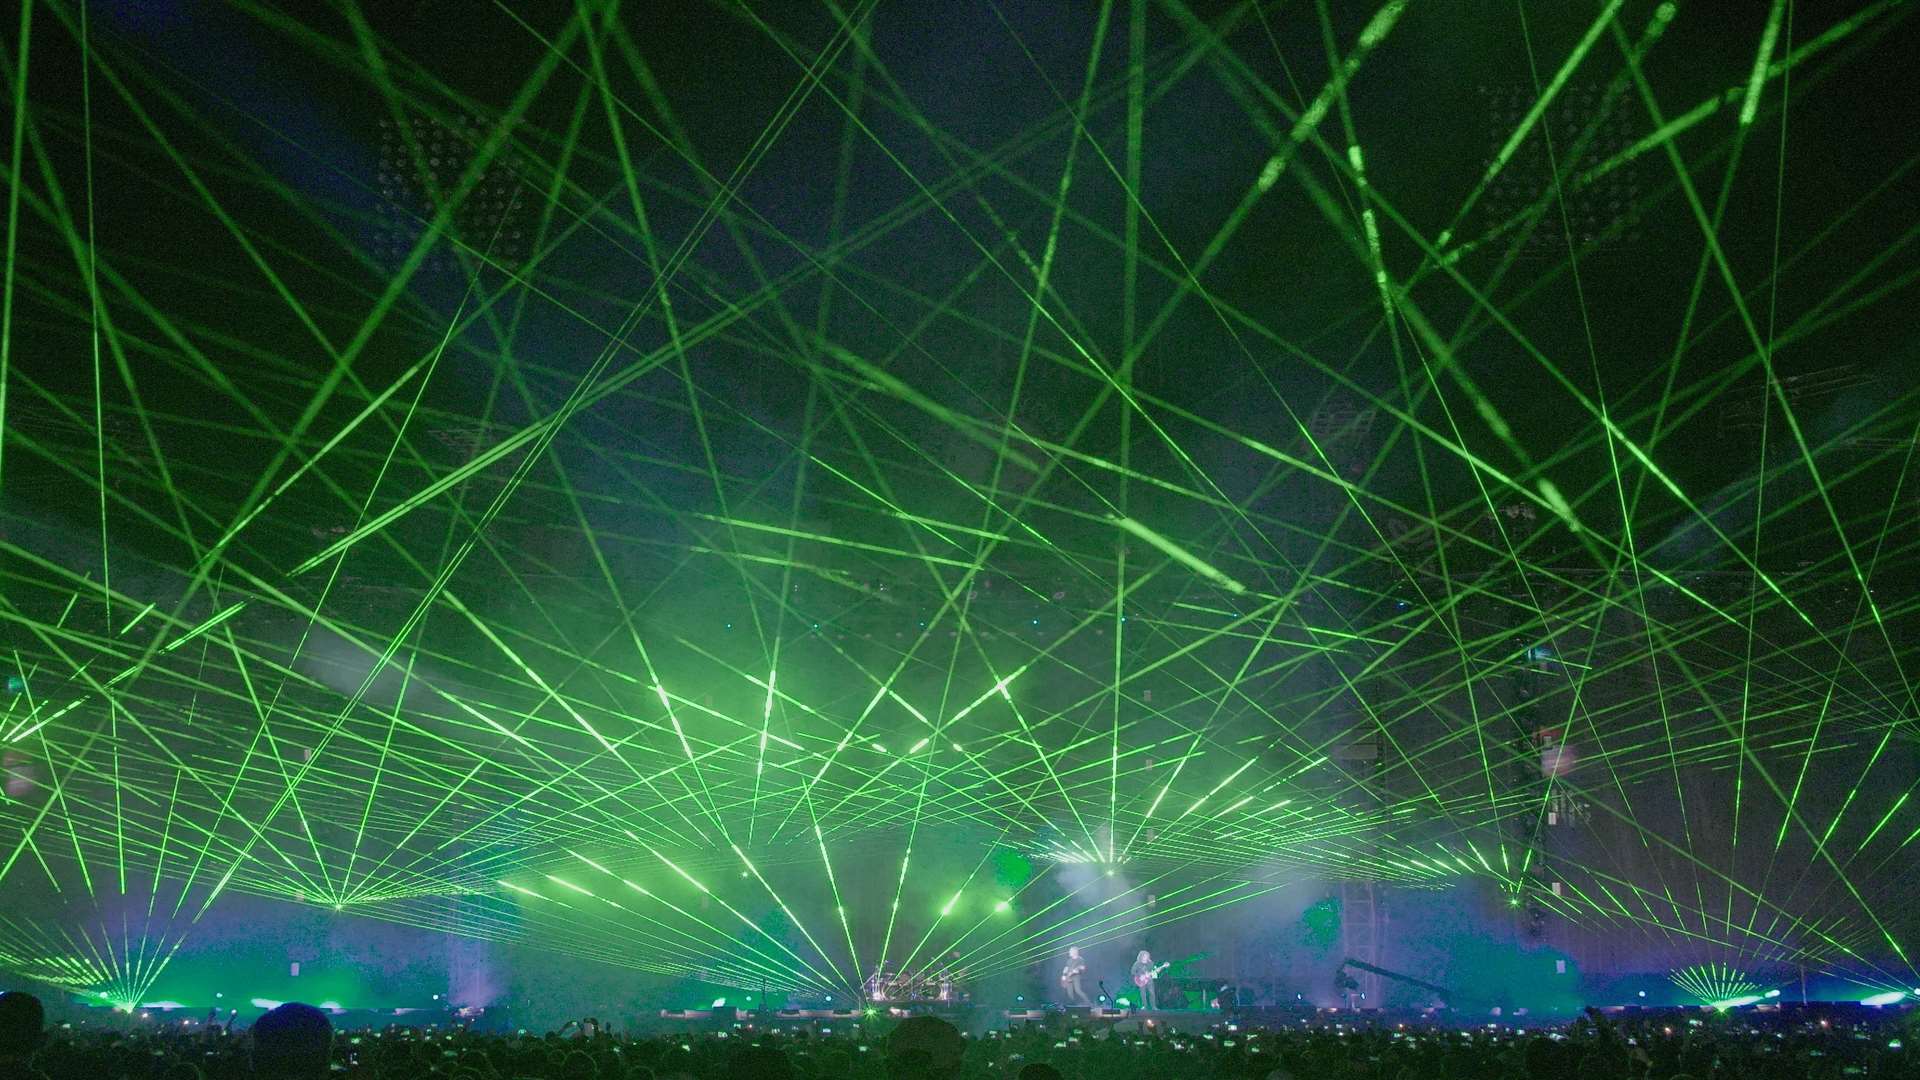 ER Productions has provided laser effects for Metallica